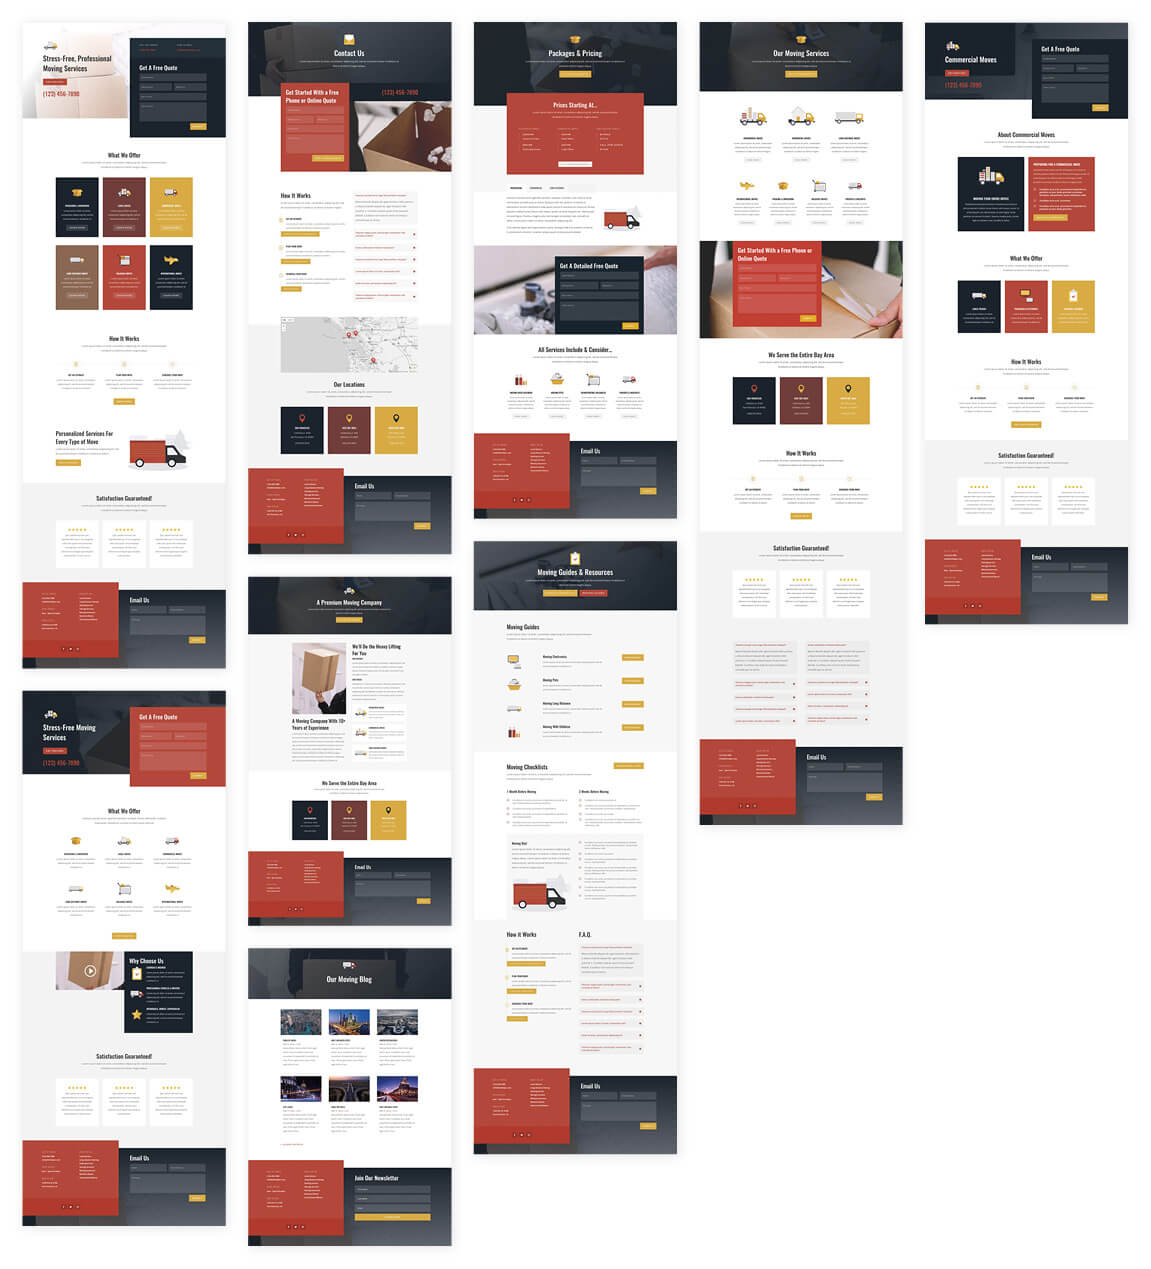 Free Moving Company Layout Pack Website Template for Divi